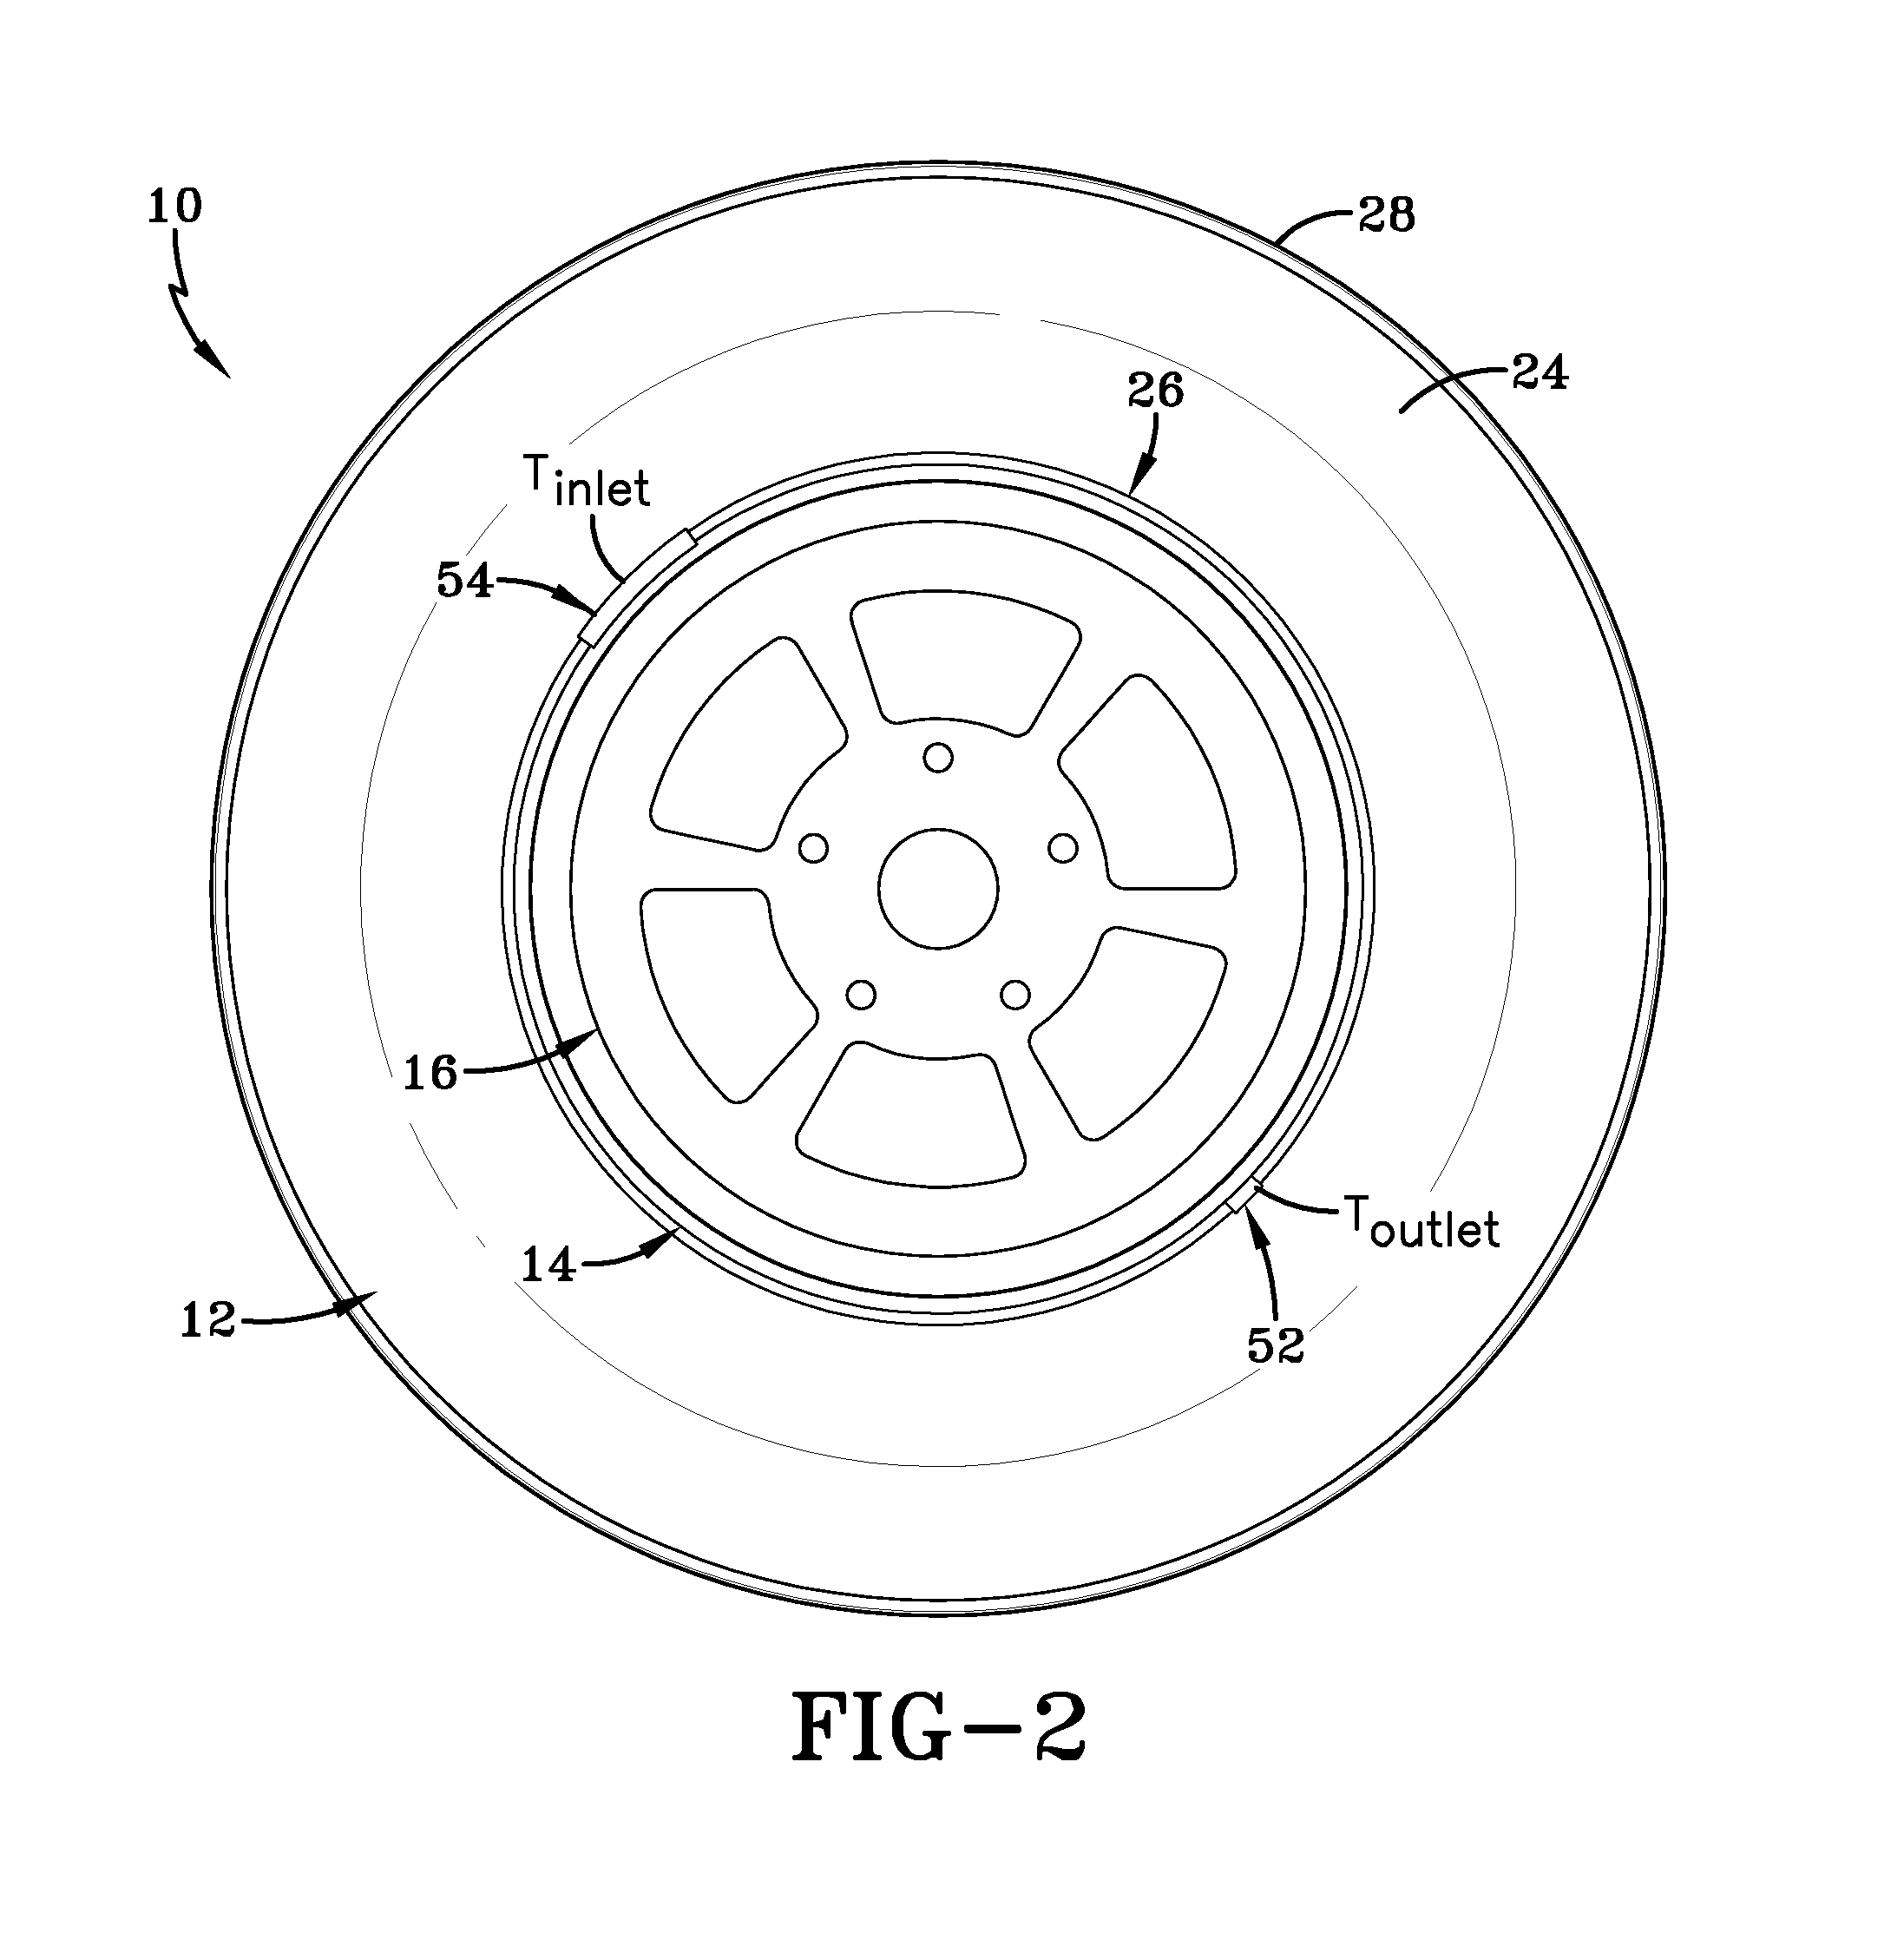 Method of manufacturing a self-inflating tire